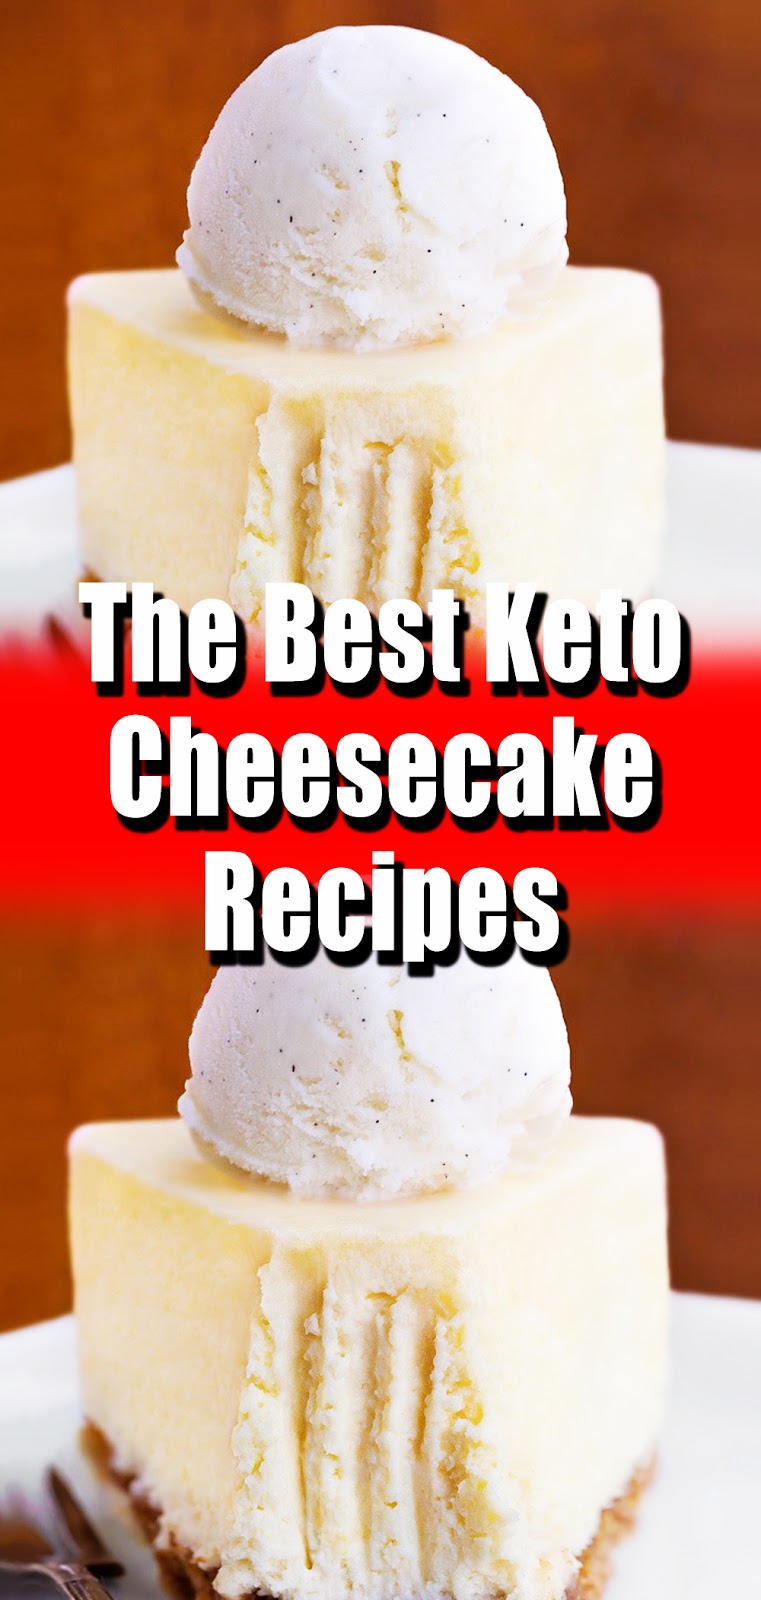 The Best Keto Cheesecake Recipes - 3 SECONDS